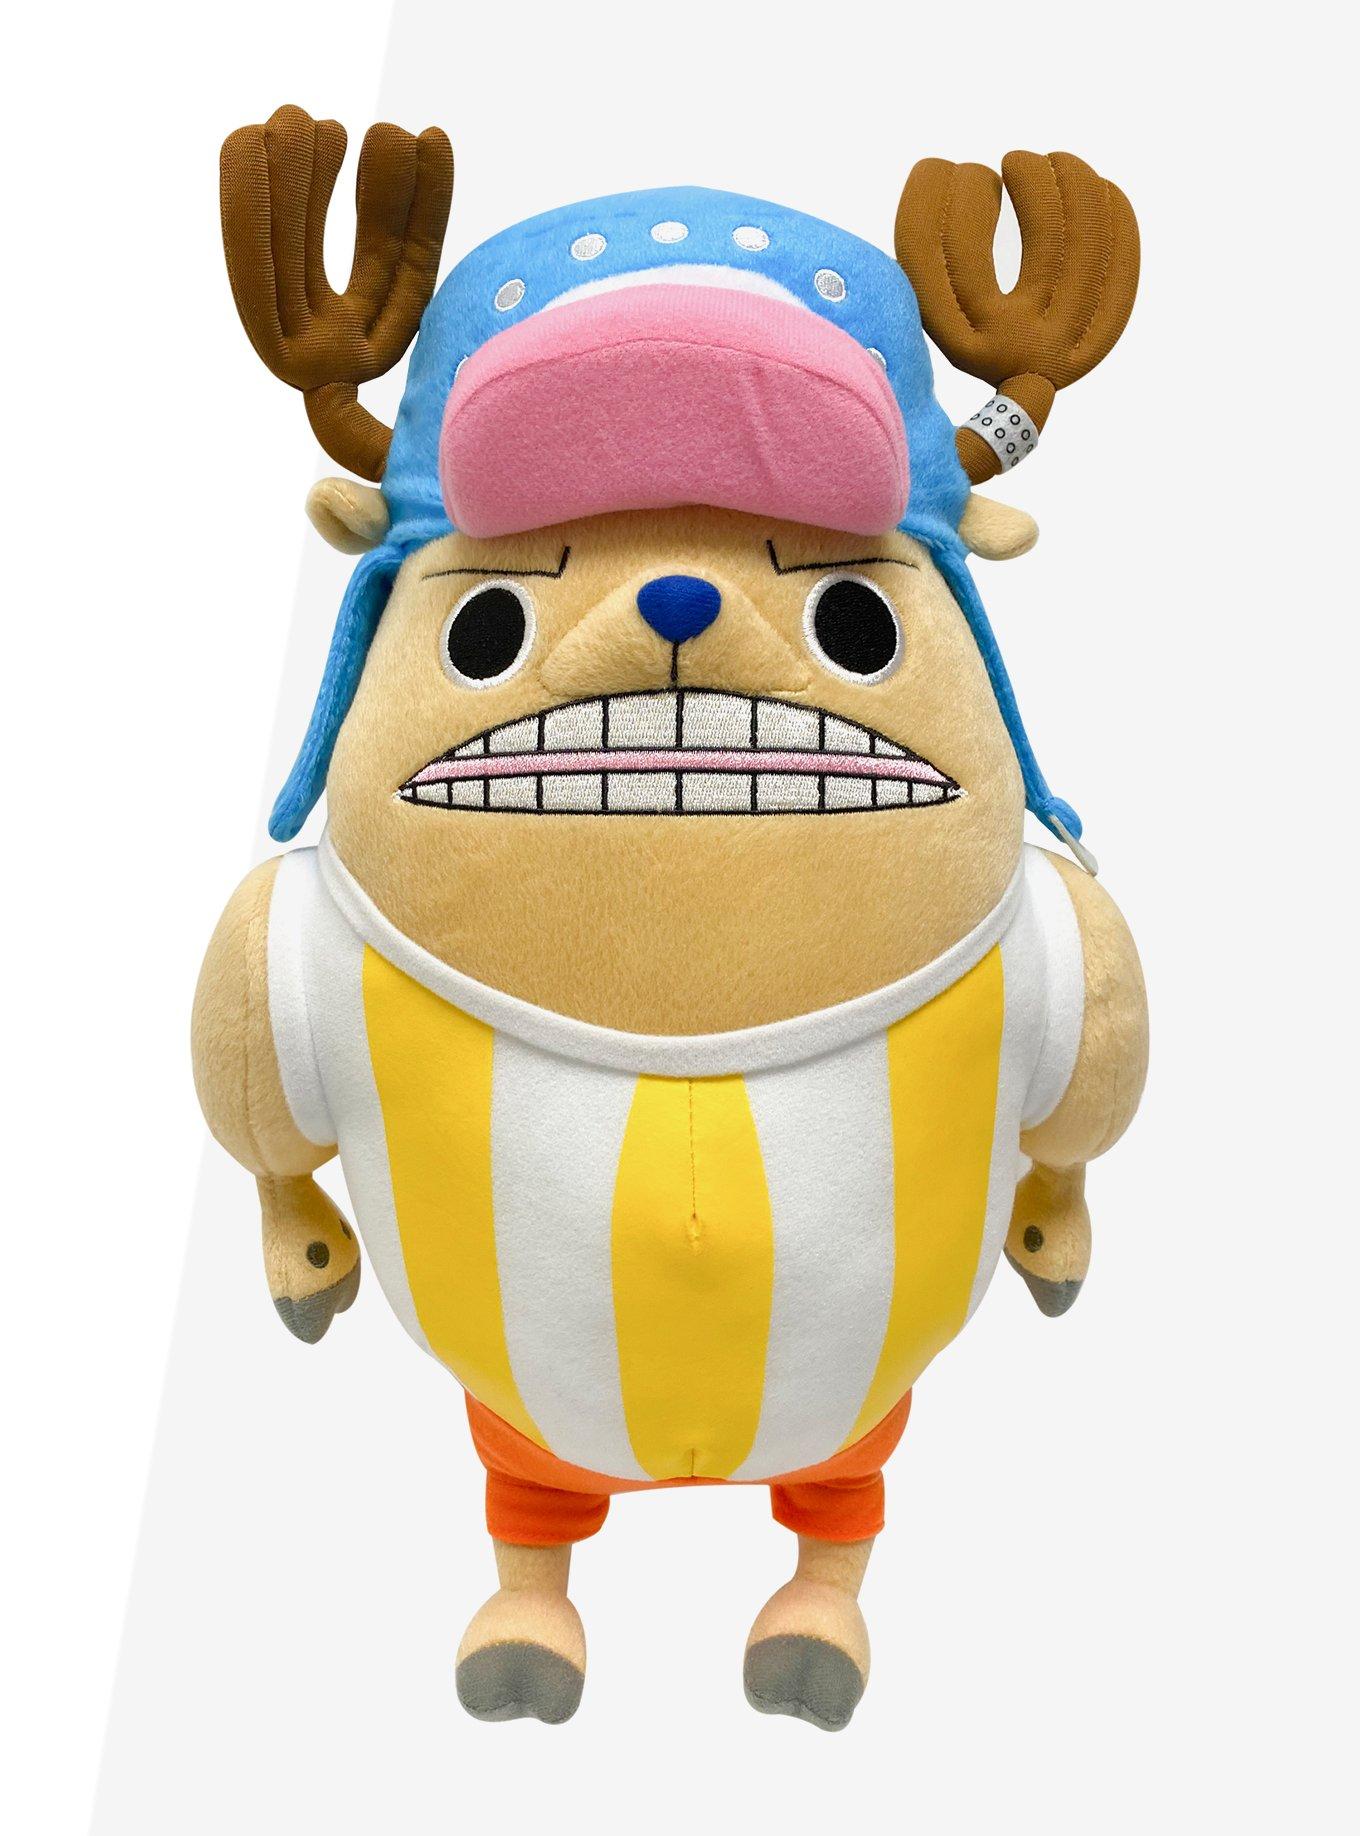 How tall is Monster Point Chopper? I heard someone say that he is